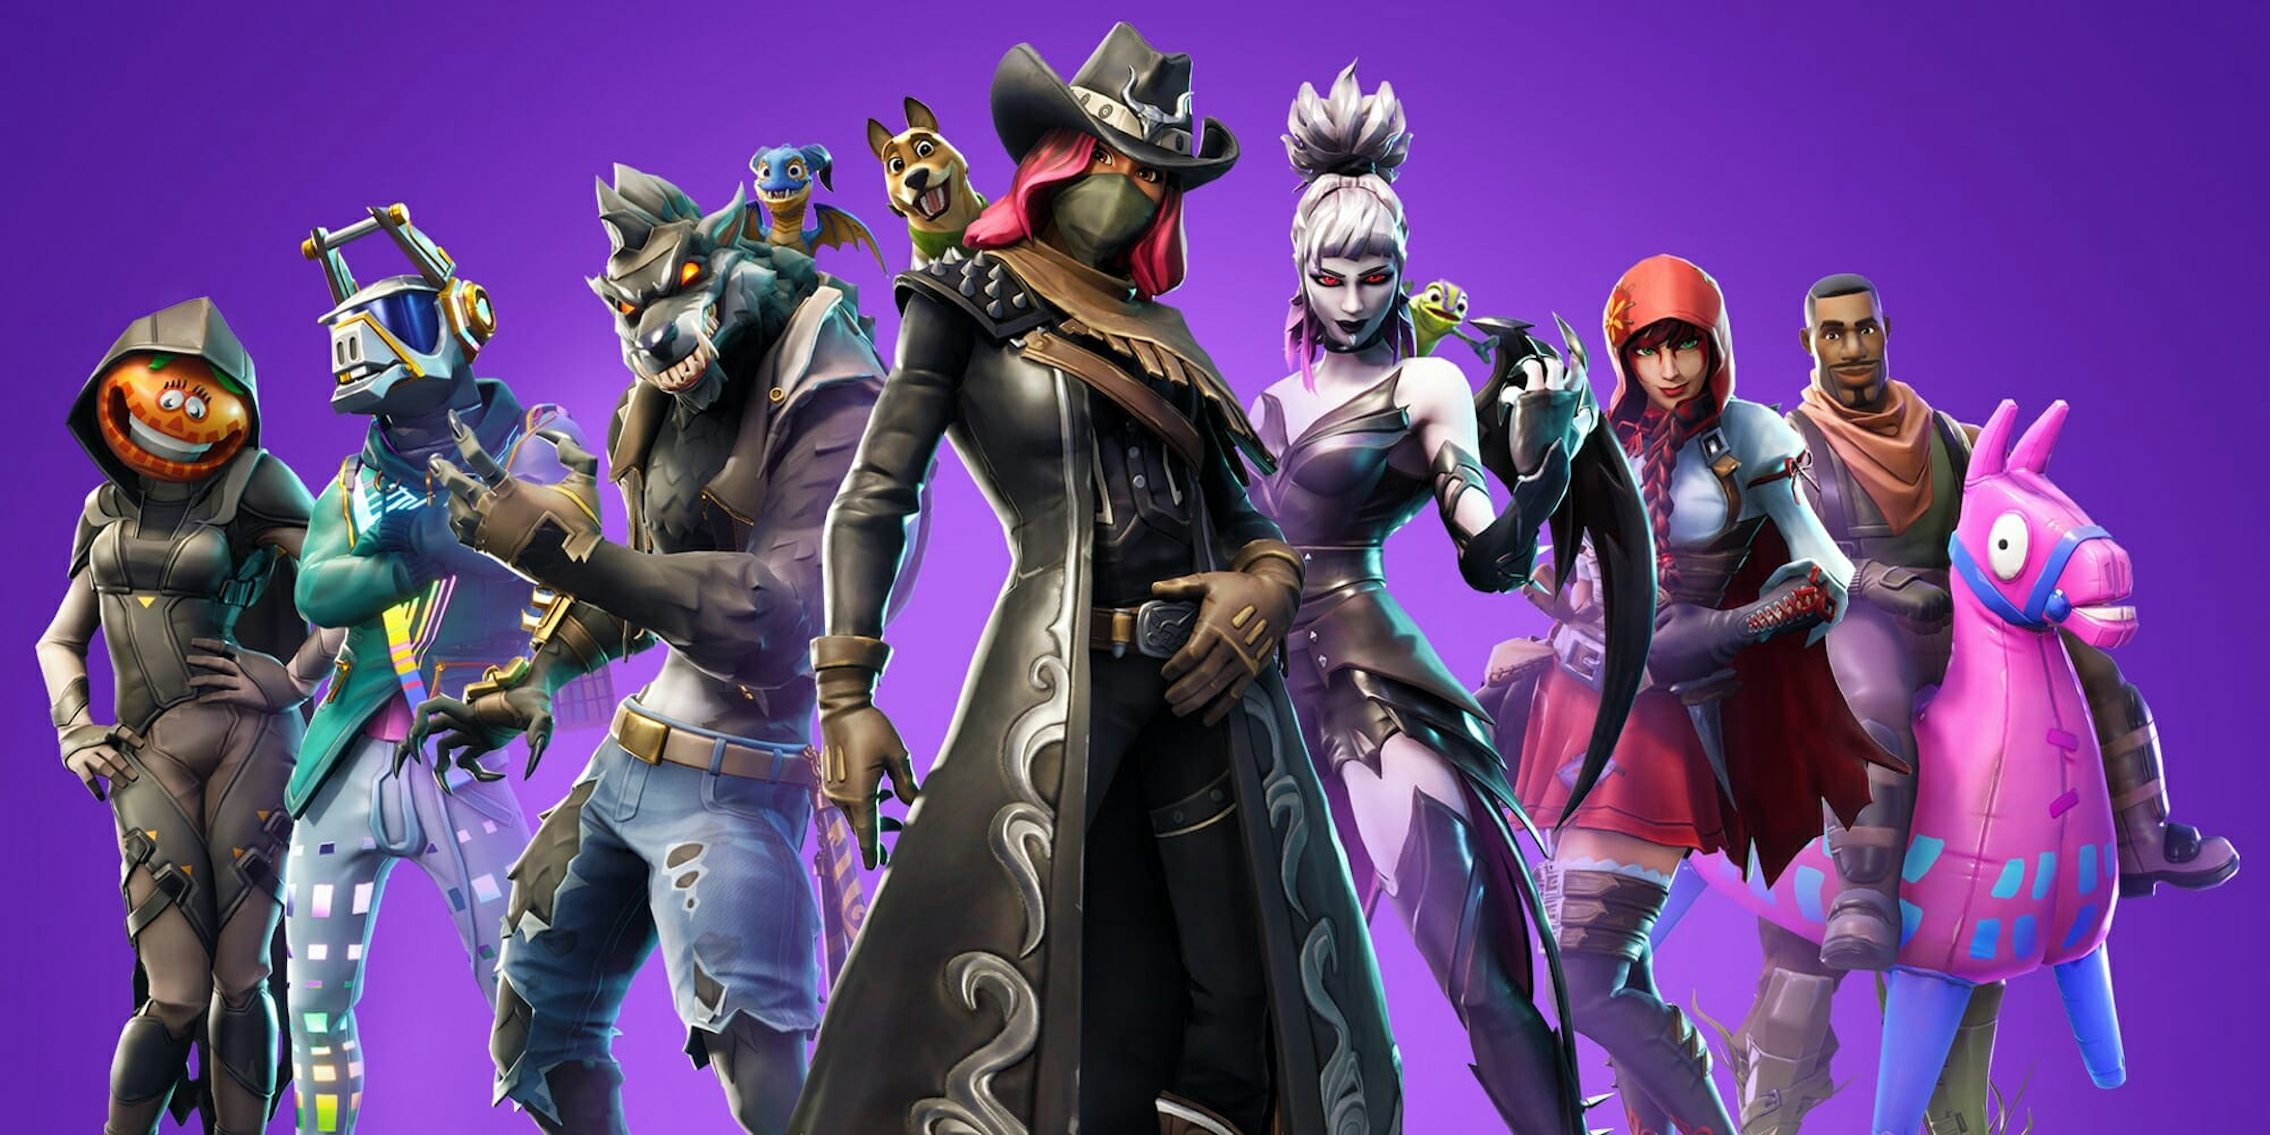 These are the seven new skins in Fortnite Season 6's Battle Pass.